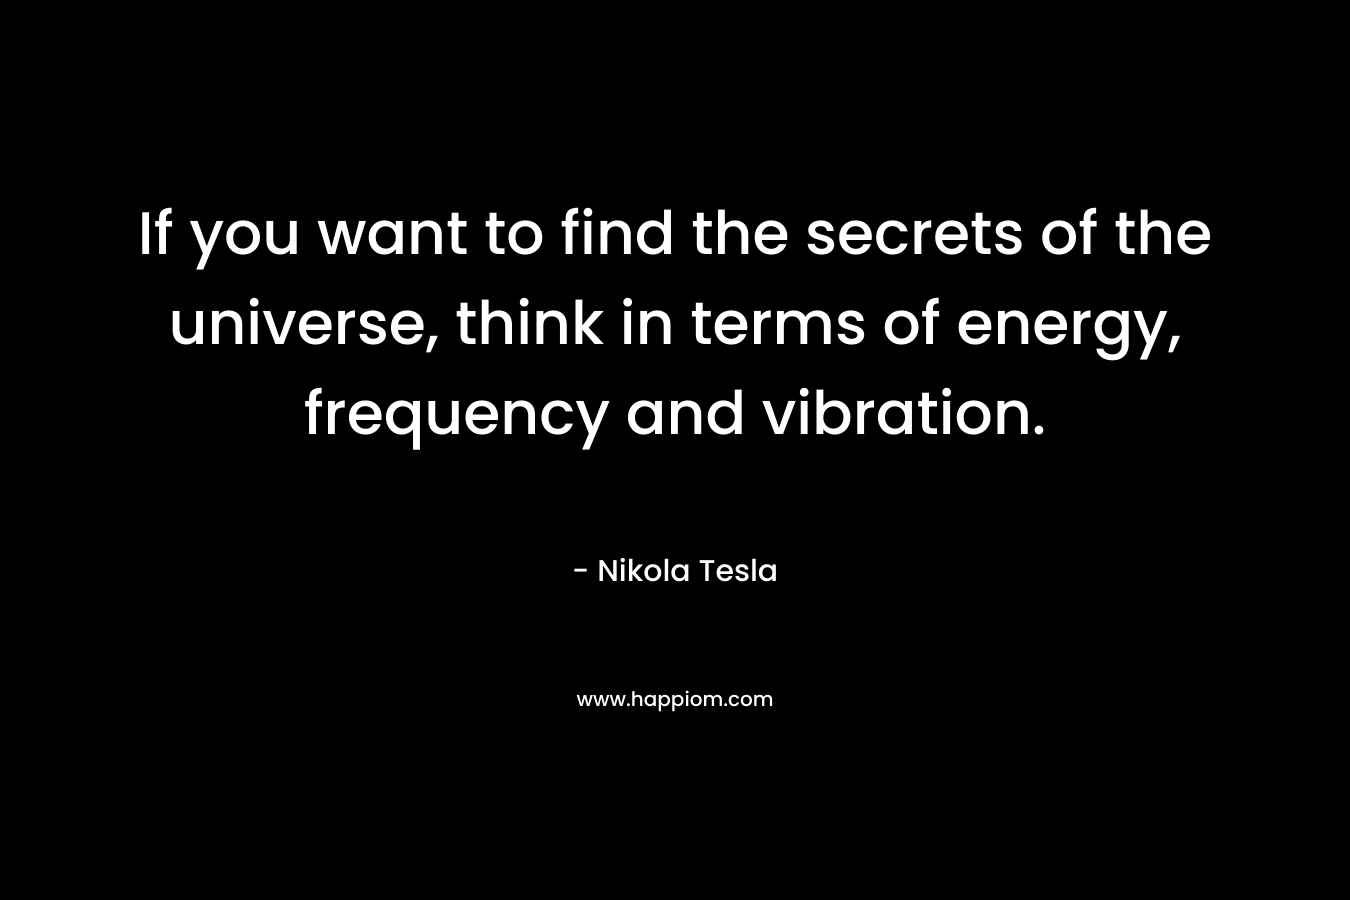 If you want to find the secrets of the universe, think in terms of energy, frequency and vibration. – Nikola Tesla